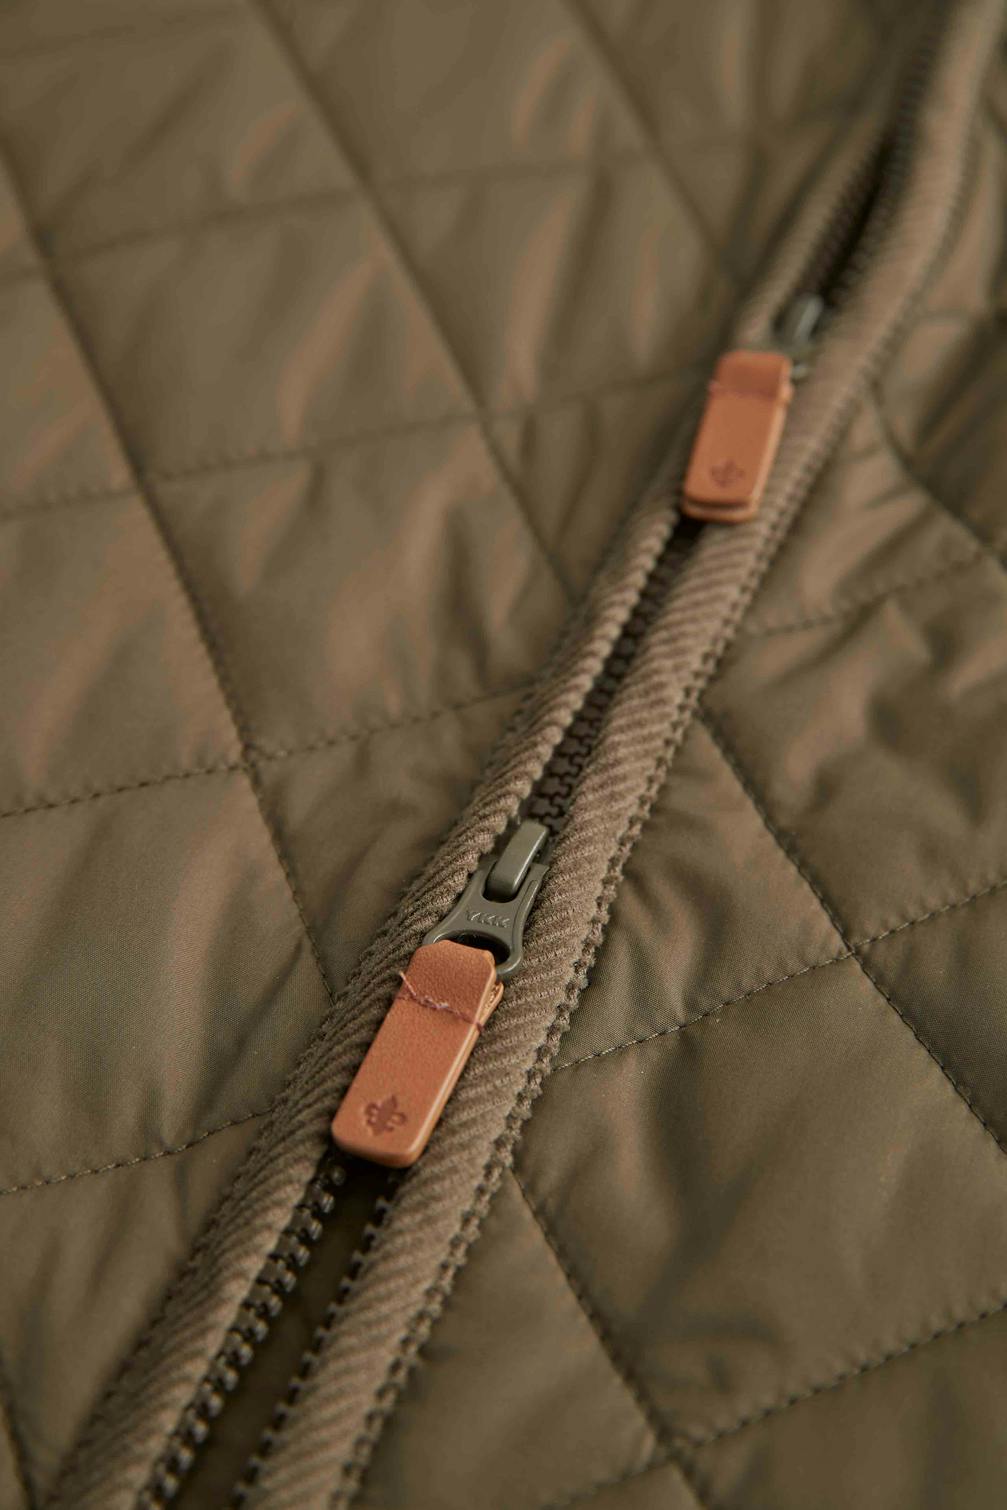 Trenton Quilted Jacket